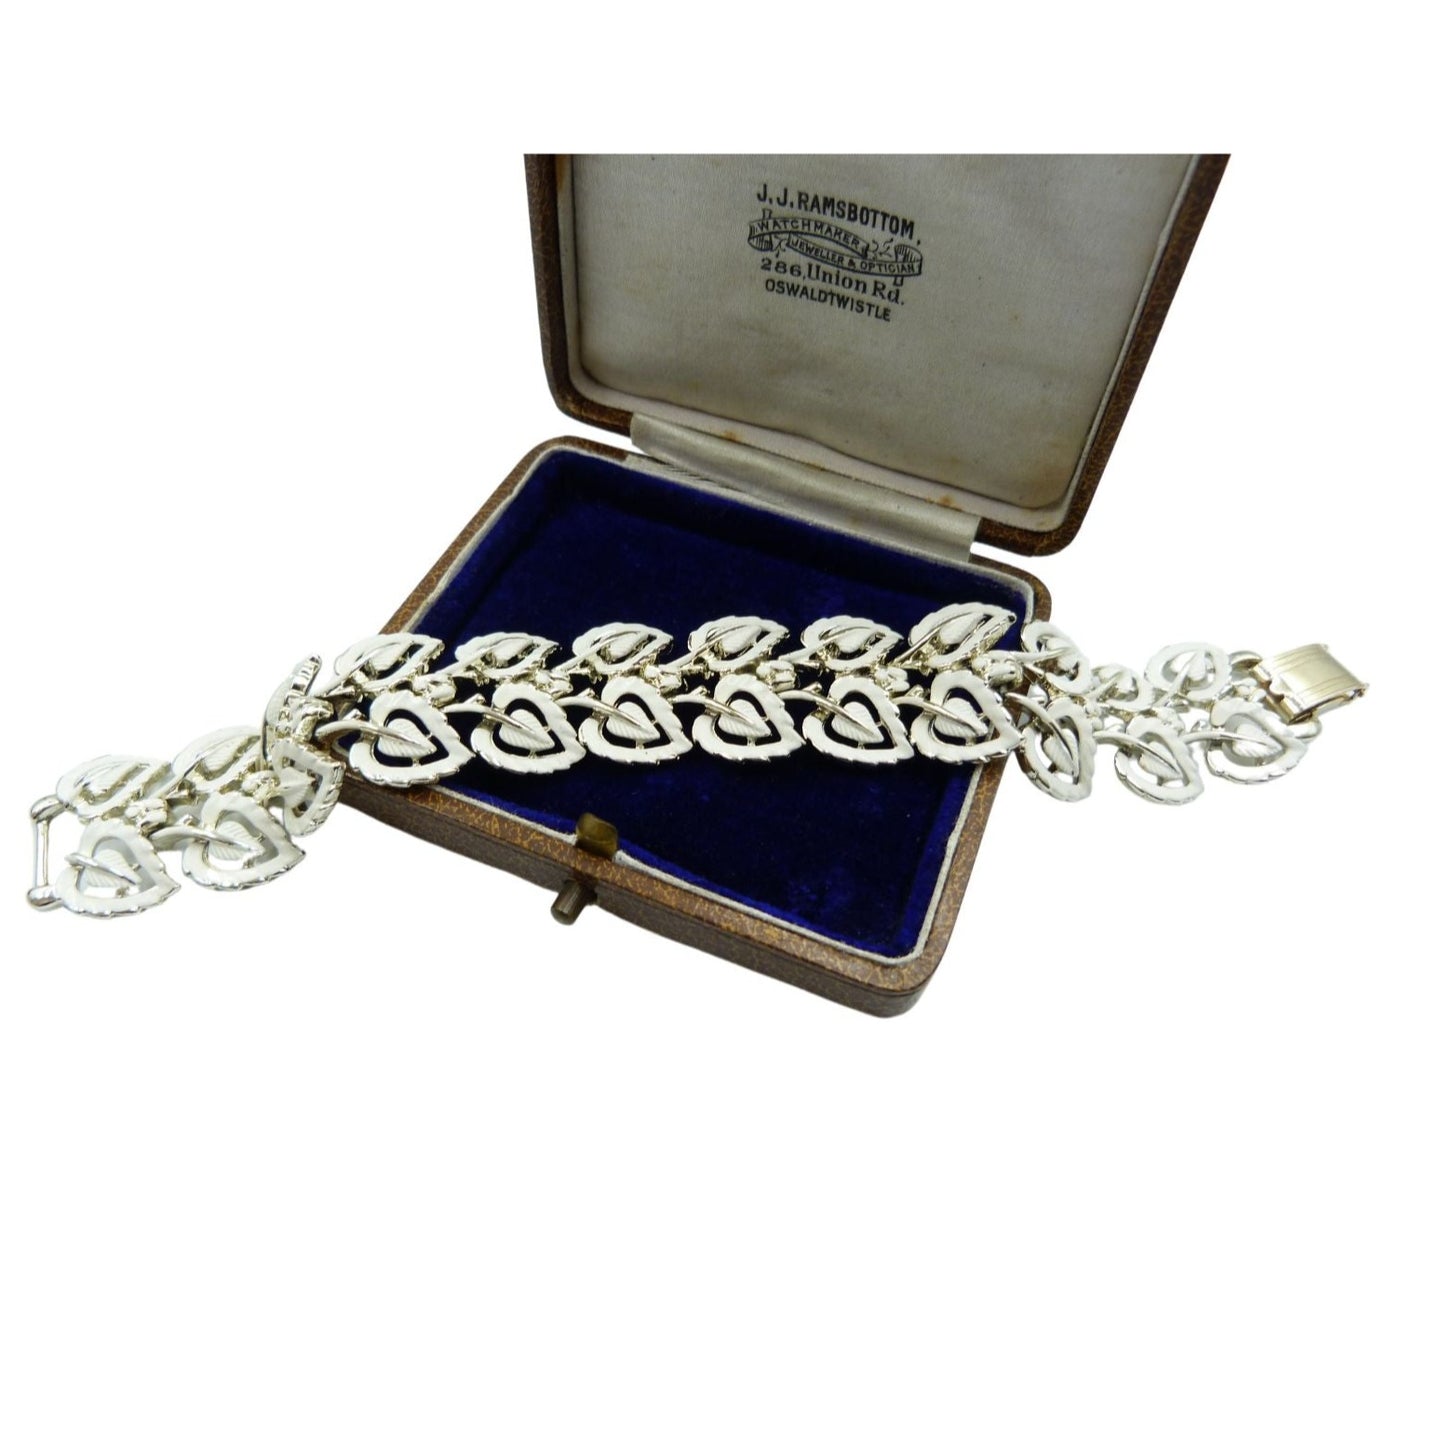 A beautiful 1950s vintage Jewelcraft bracelet made of silver tone white metal decorated with a white enamel leaf pattern design and a gold coloured clasp. 